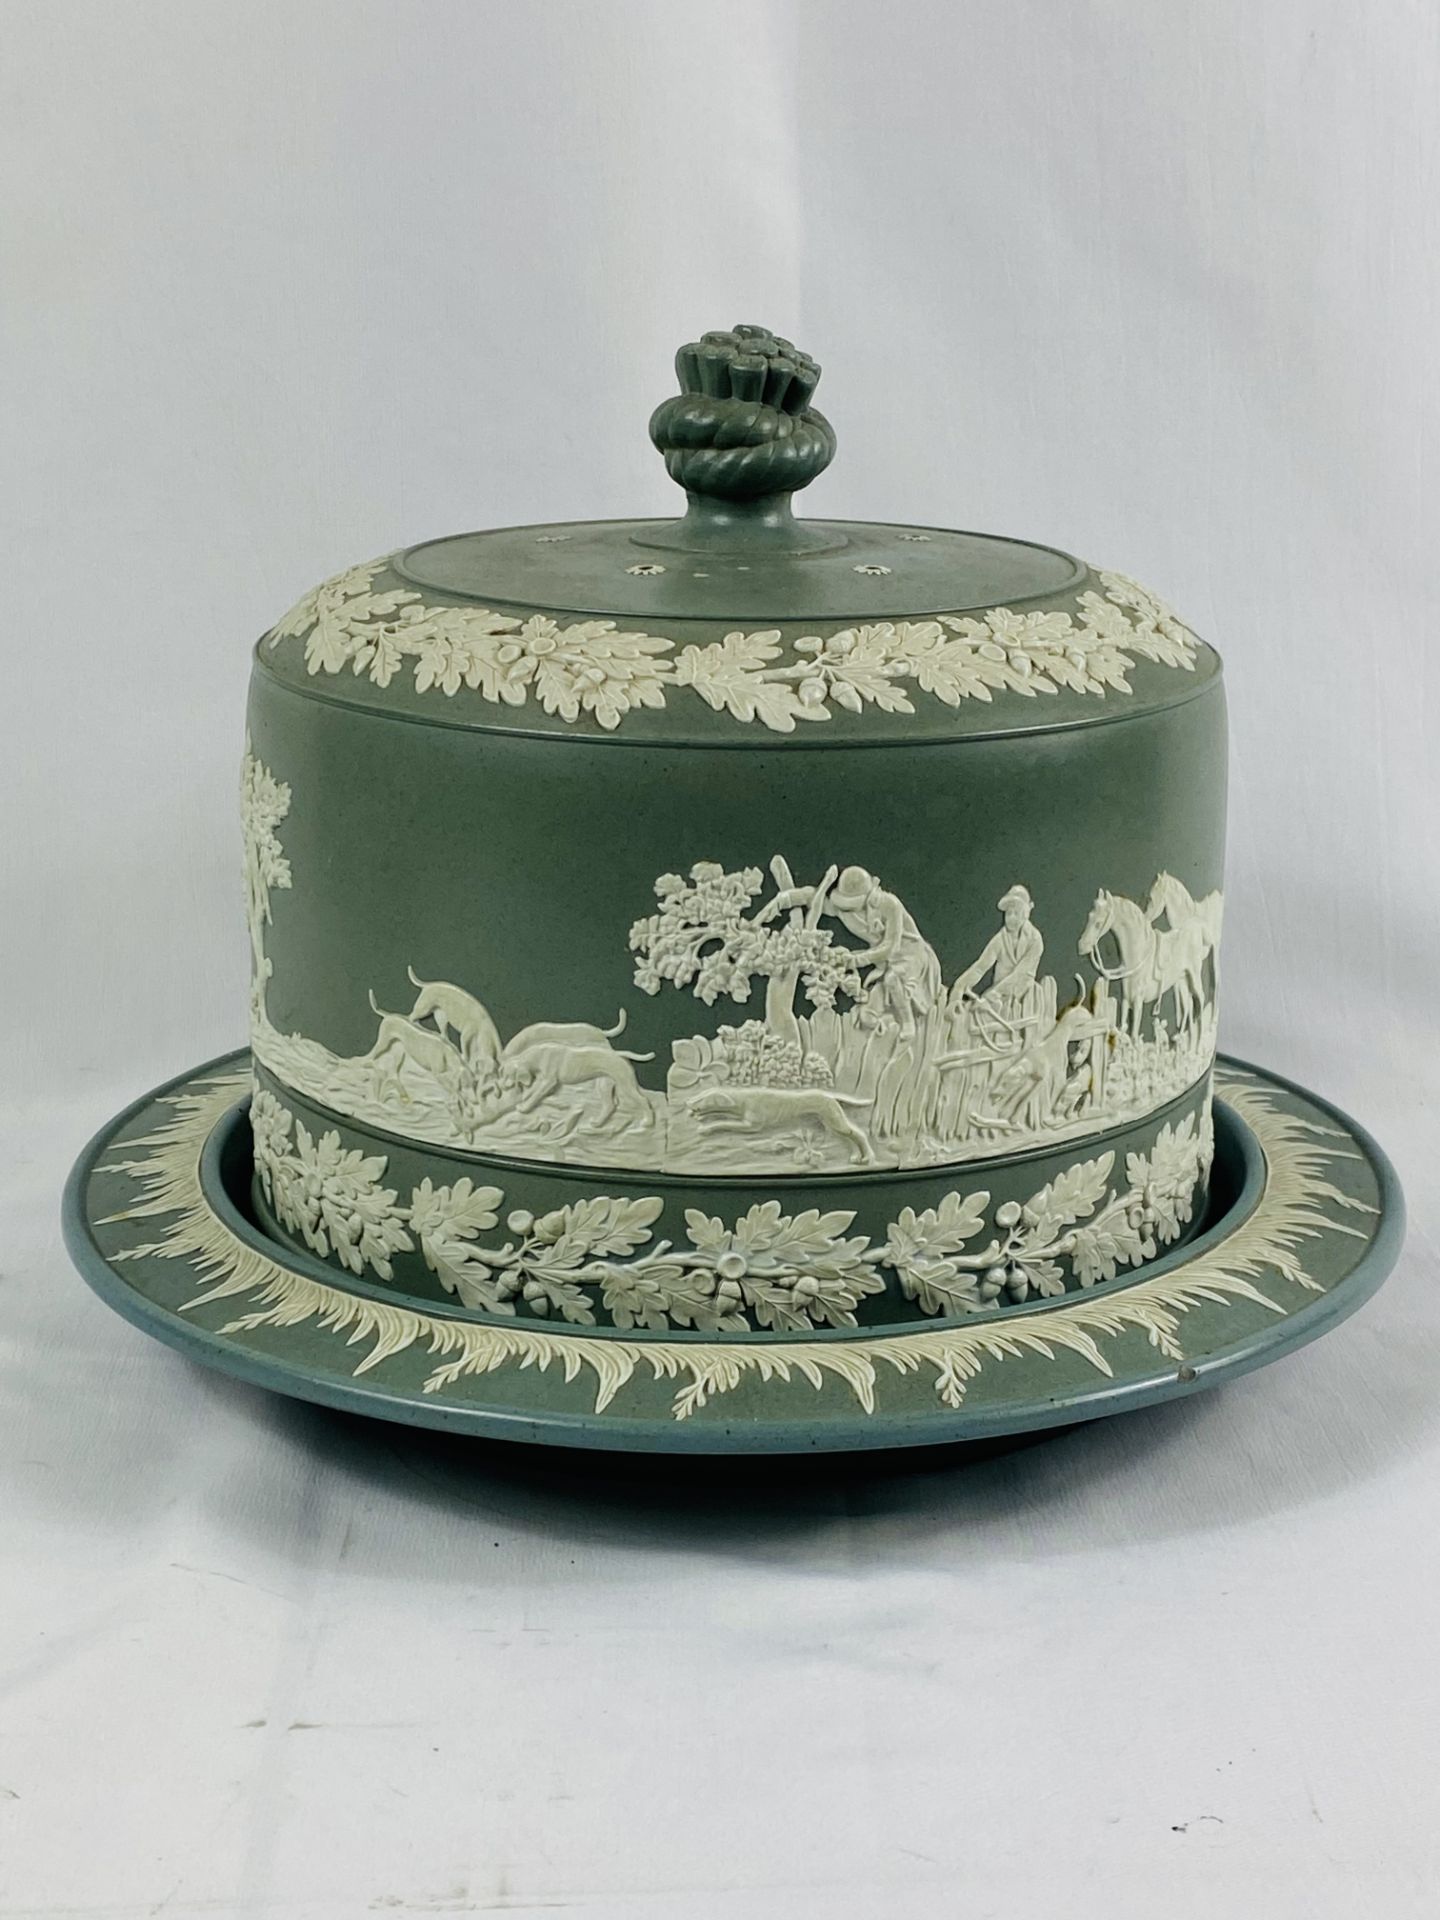 Wedgwood style cheese cloche